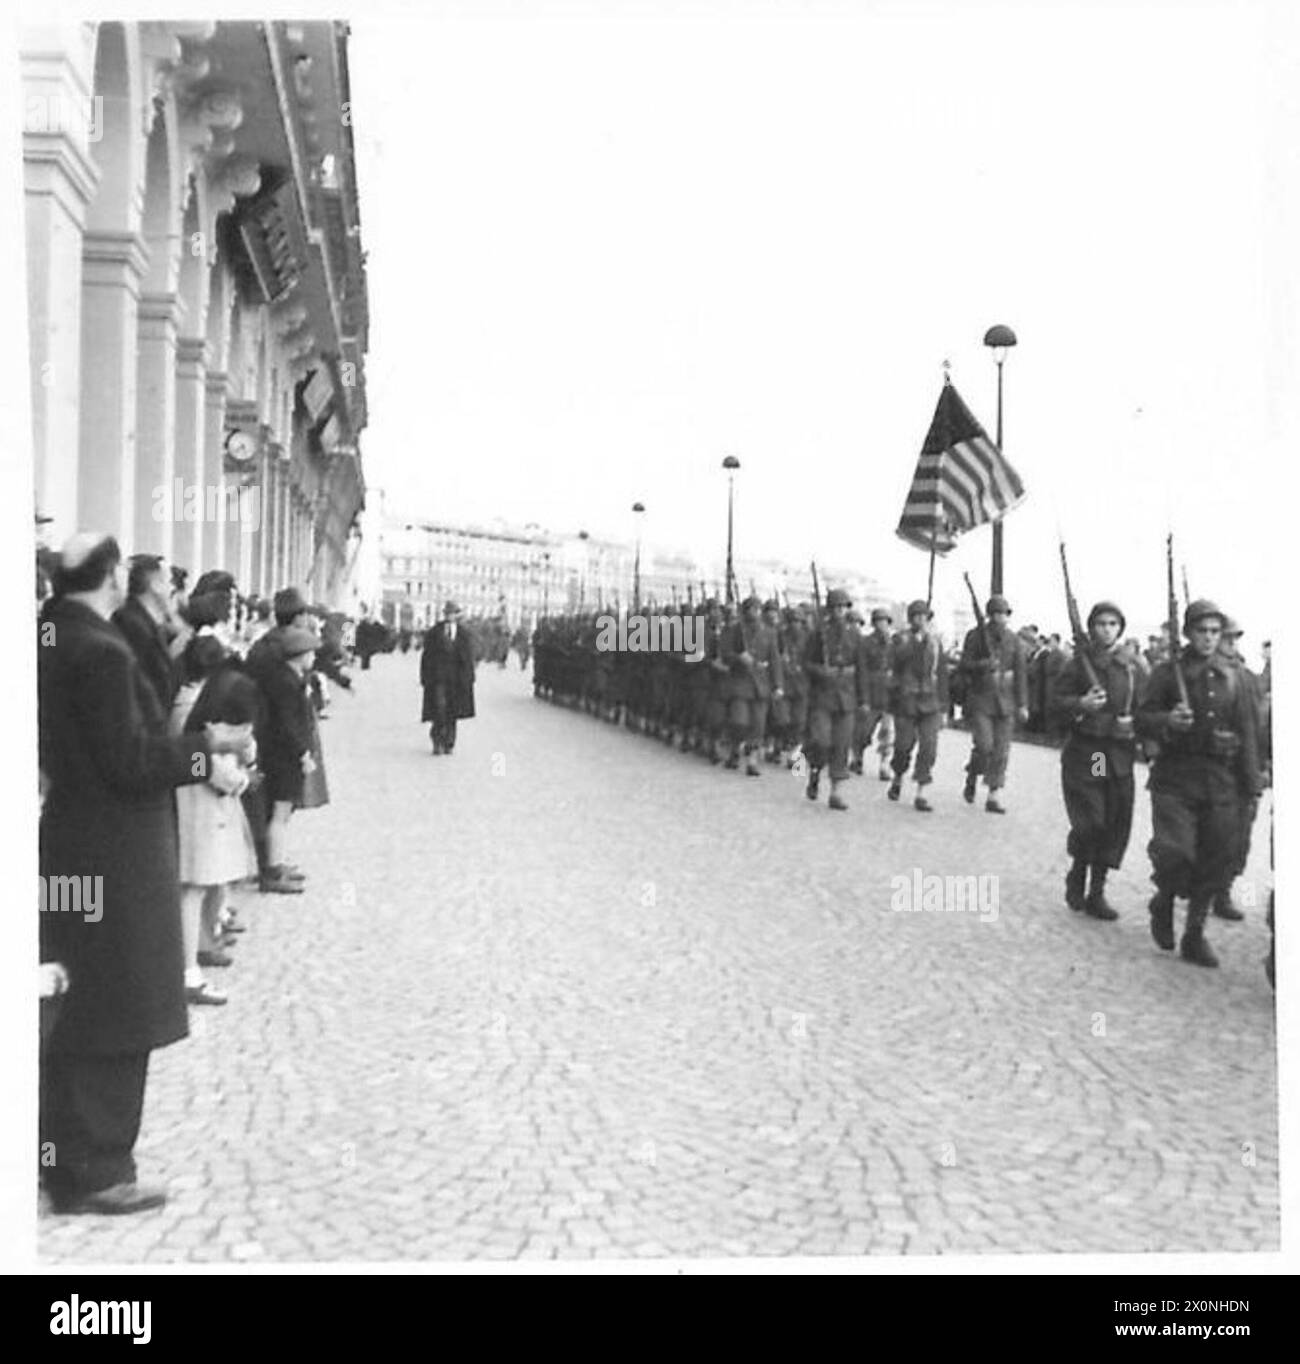 THE ALLIED OCCUPATION OF FRENCH NORTH AFRICA, 1942-1945 - Battalion of the US Army led by an officer with the American flag at a ceremonial parade in Allied-occupied Algiers. Photograph probably taken during commemoration parade of Napoleon's victory at Austerlitz, 2 December 1942 US Army Stock Photo